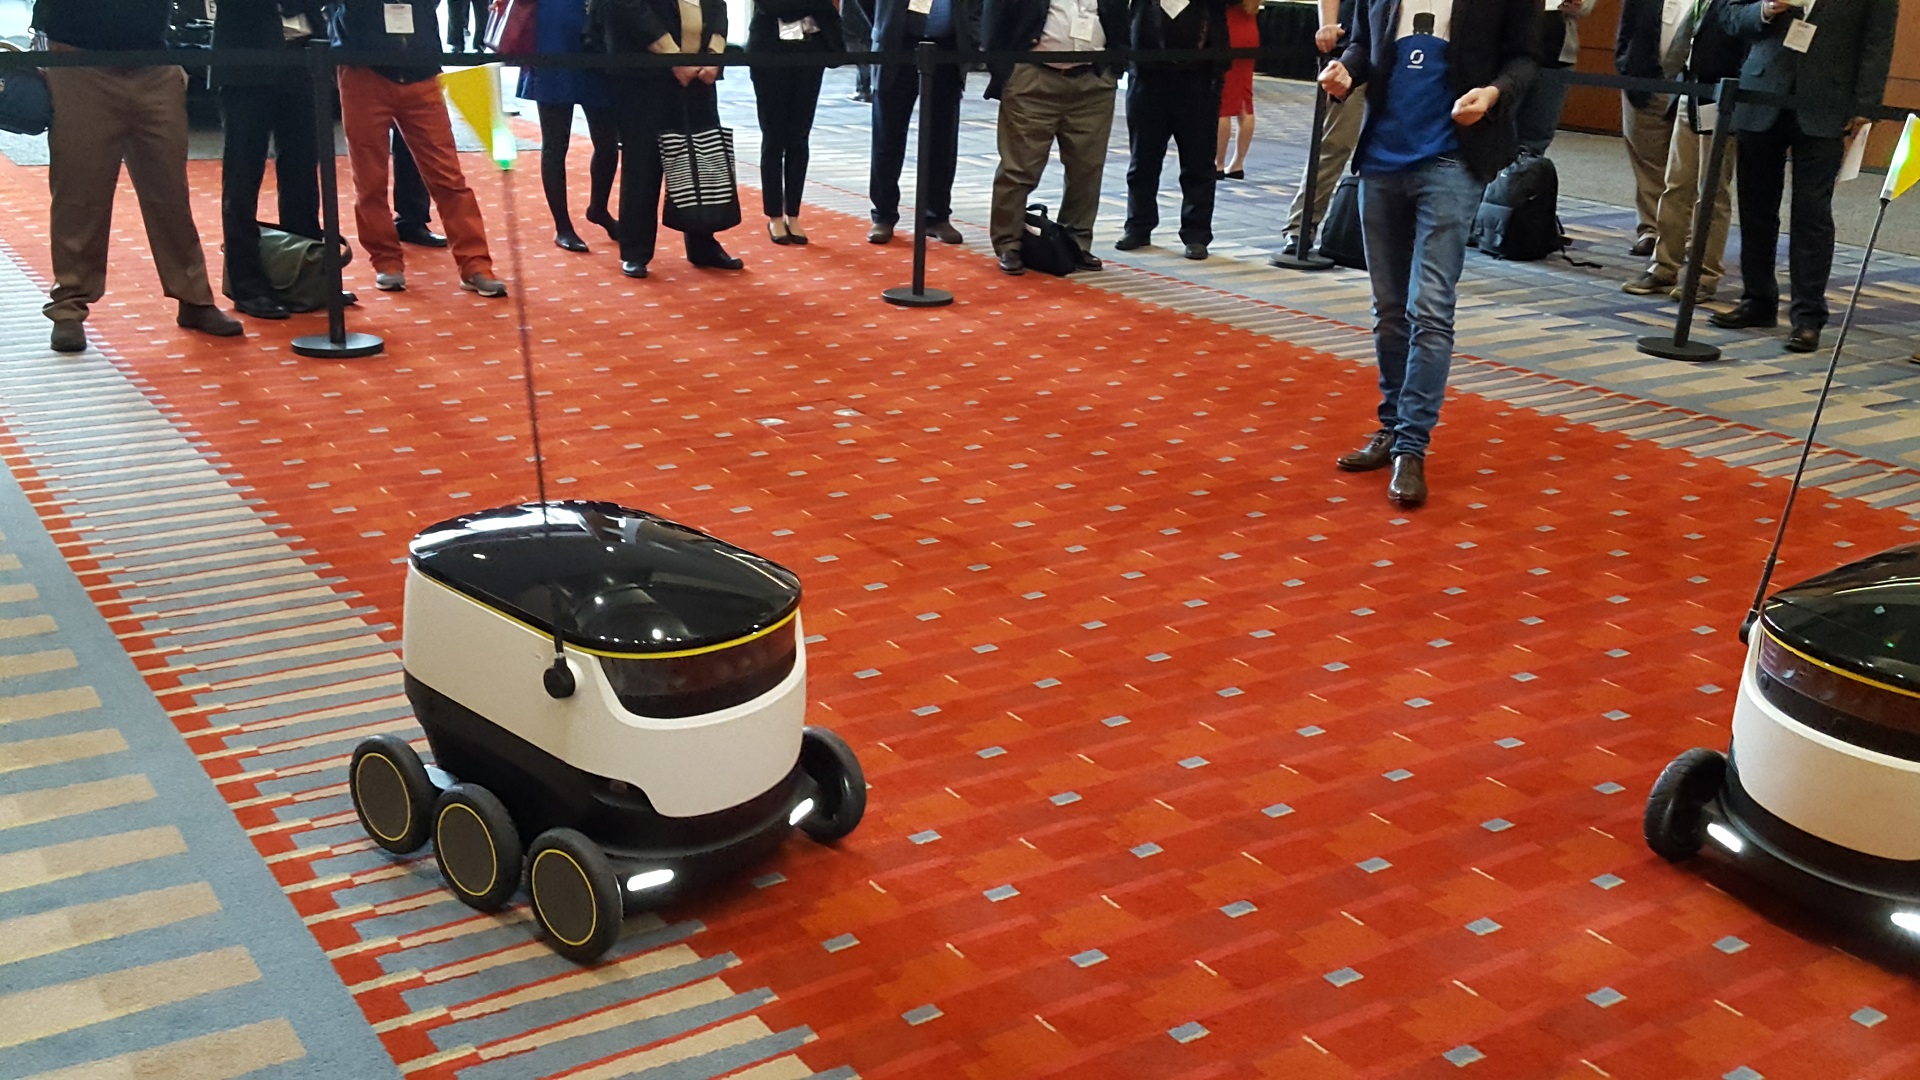 Starship electric sidewalkdelivery robot a hit at DC Auto Show